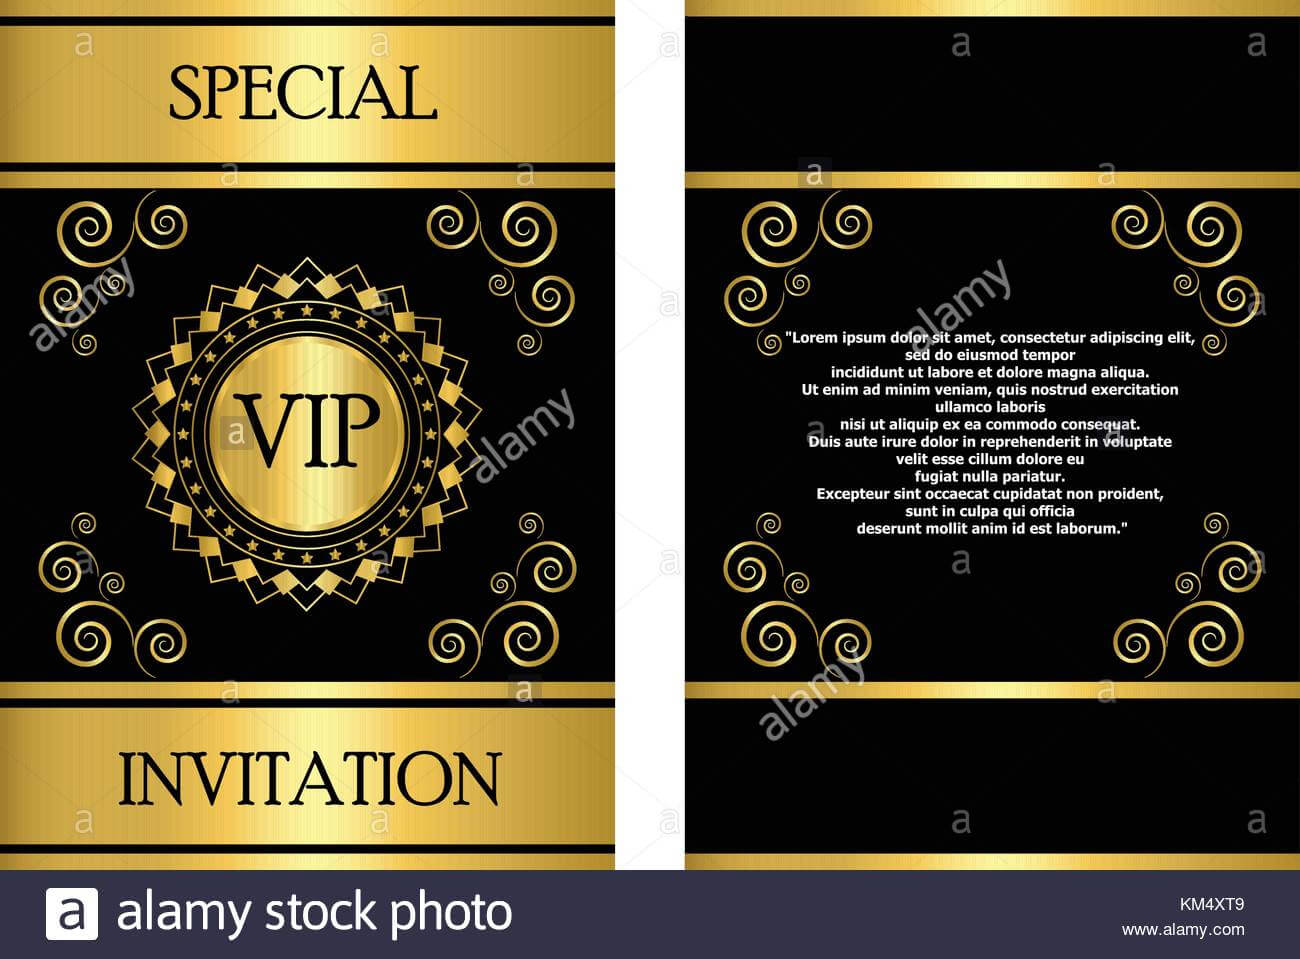 A Golden Vip Invitation Card Template That Can Be Used For Regarding Event Invitation Card Template